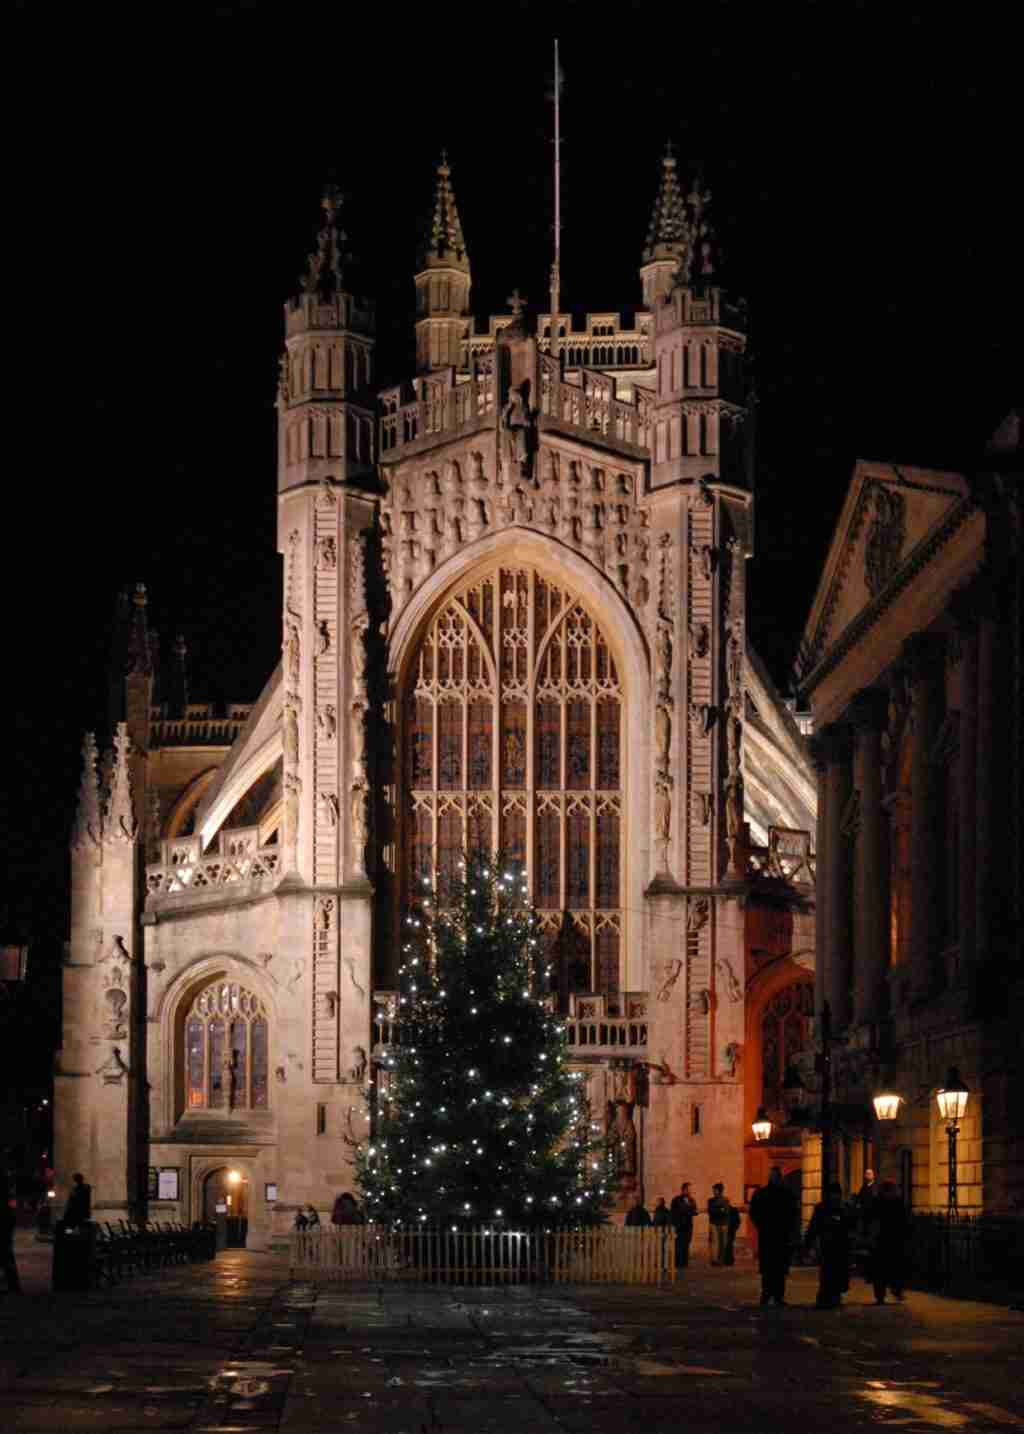 Front of the Abbey at night with Christmas tree in front